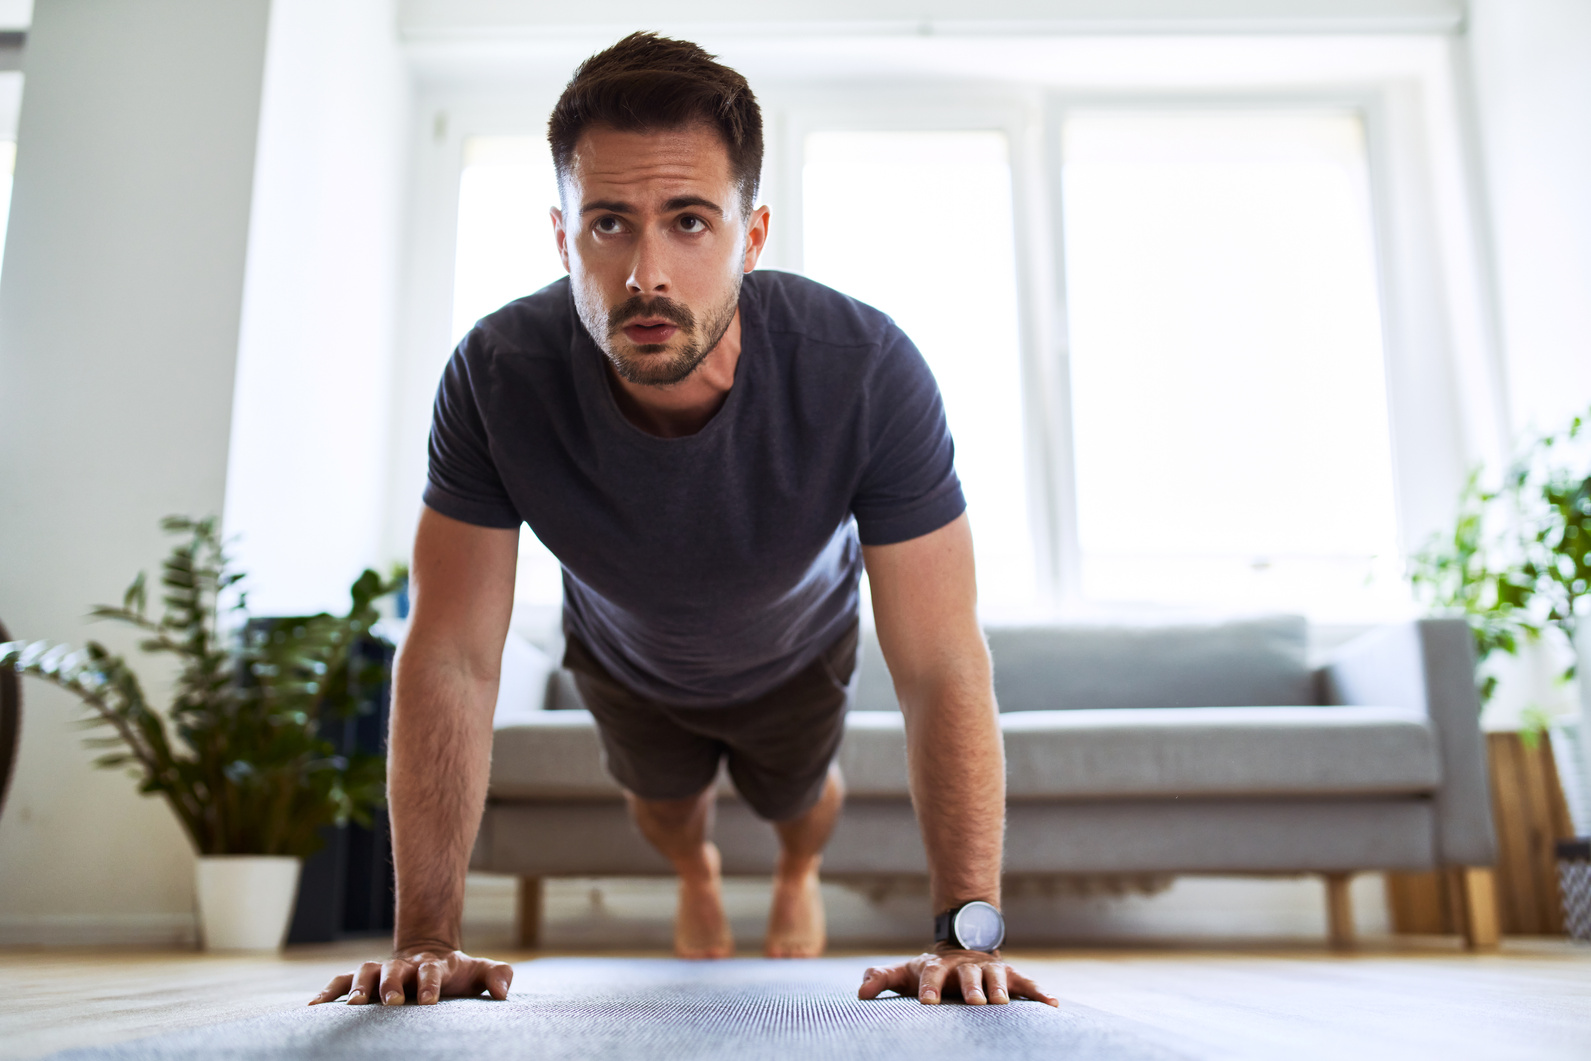 Man doing pushup exercise during home workout.